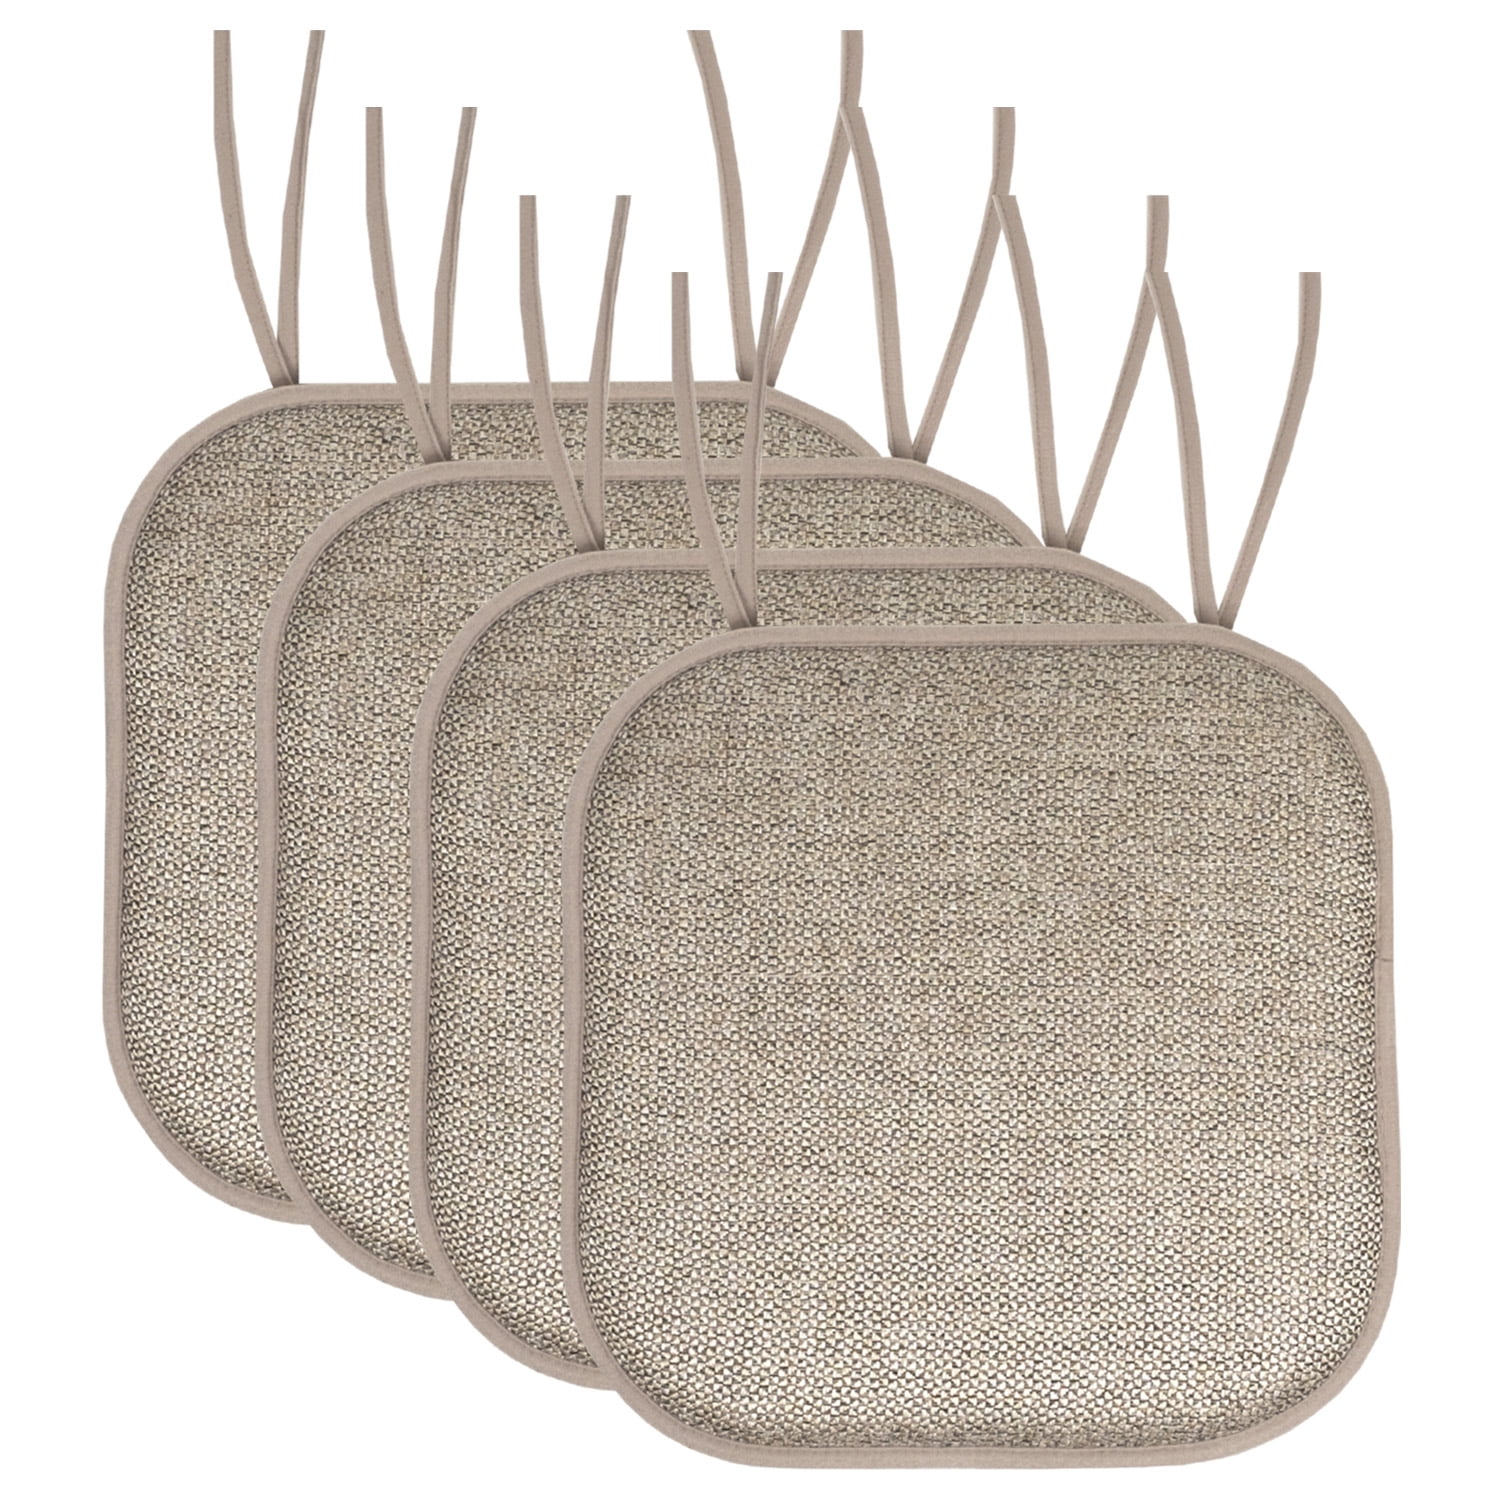 Cameron Memory Foam Non-Slip Chair Cushion Pad with Ties 4 Pack - Beige